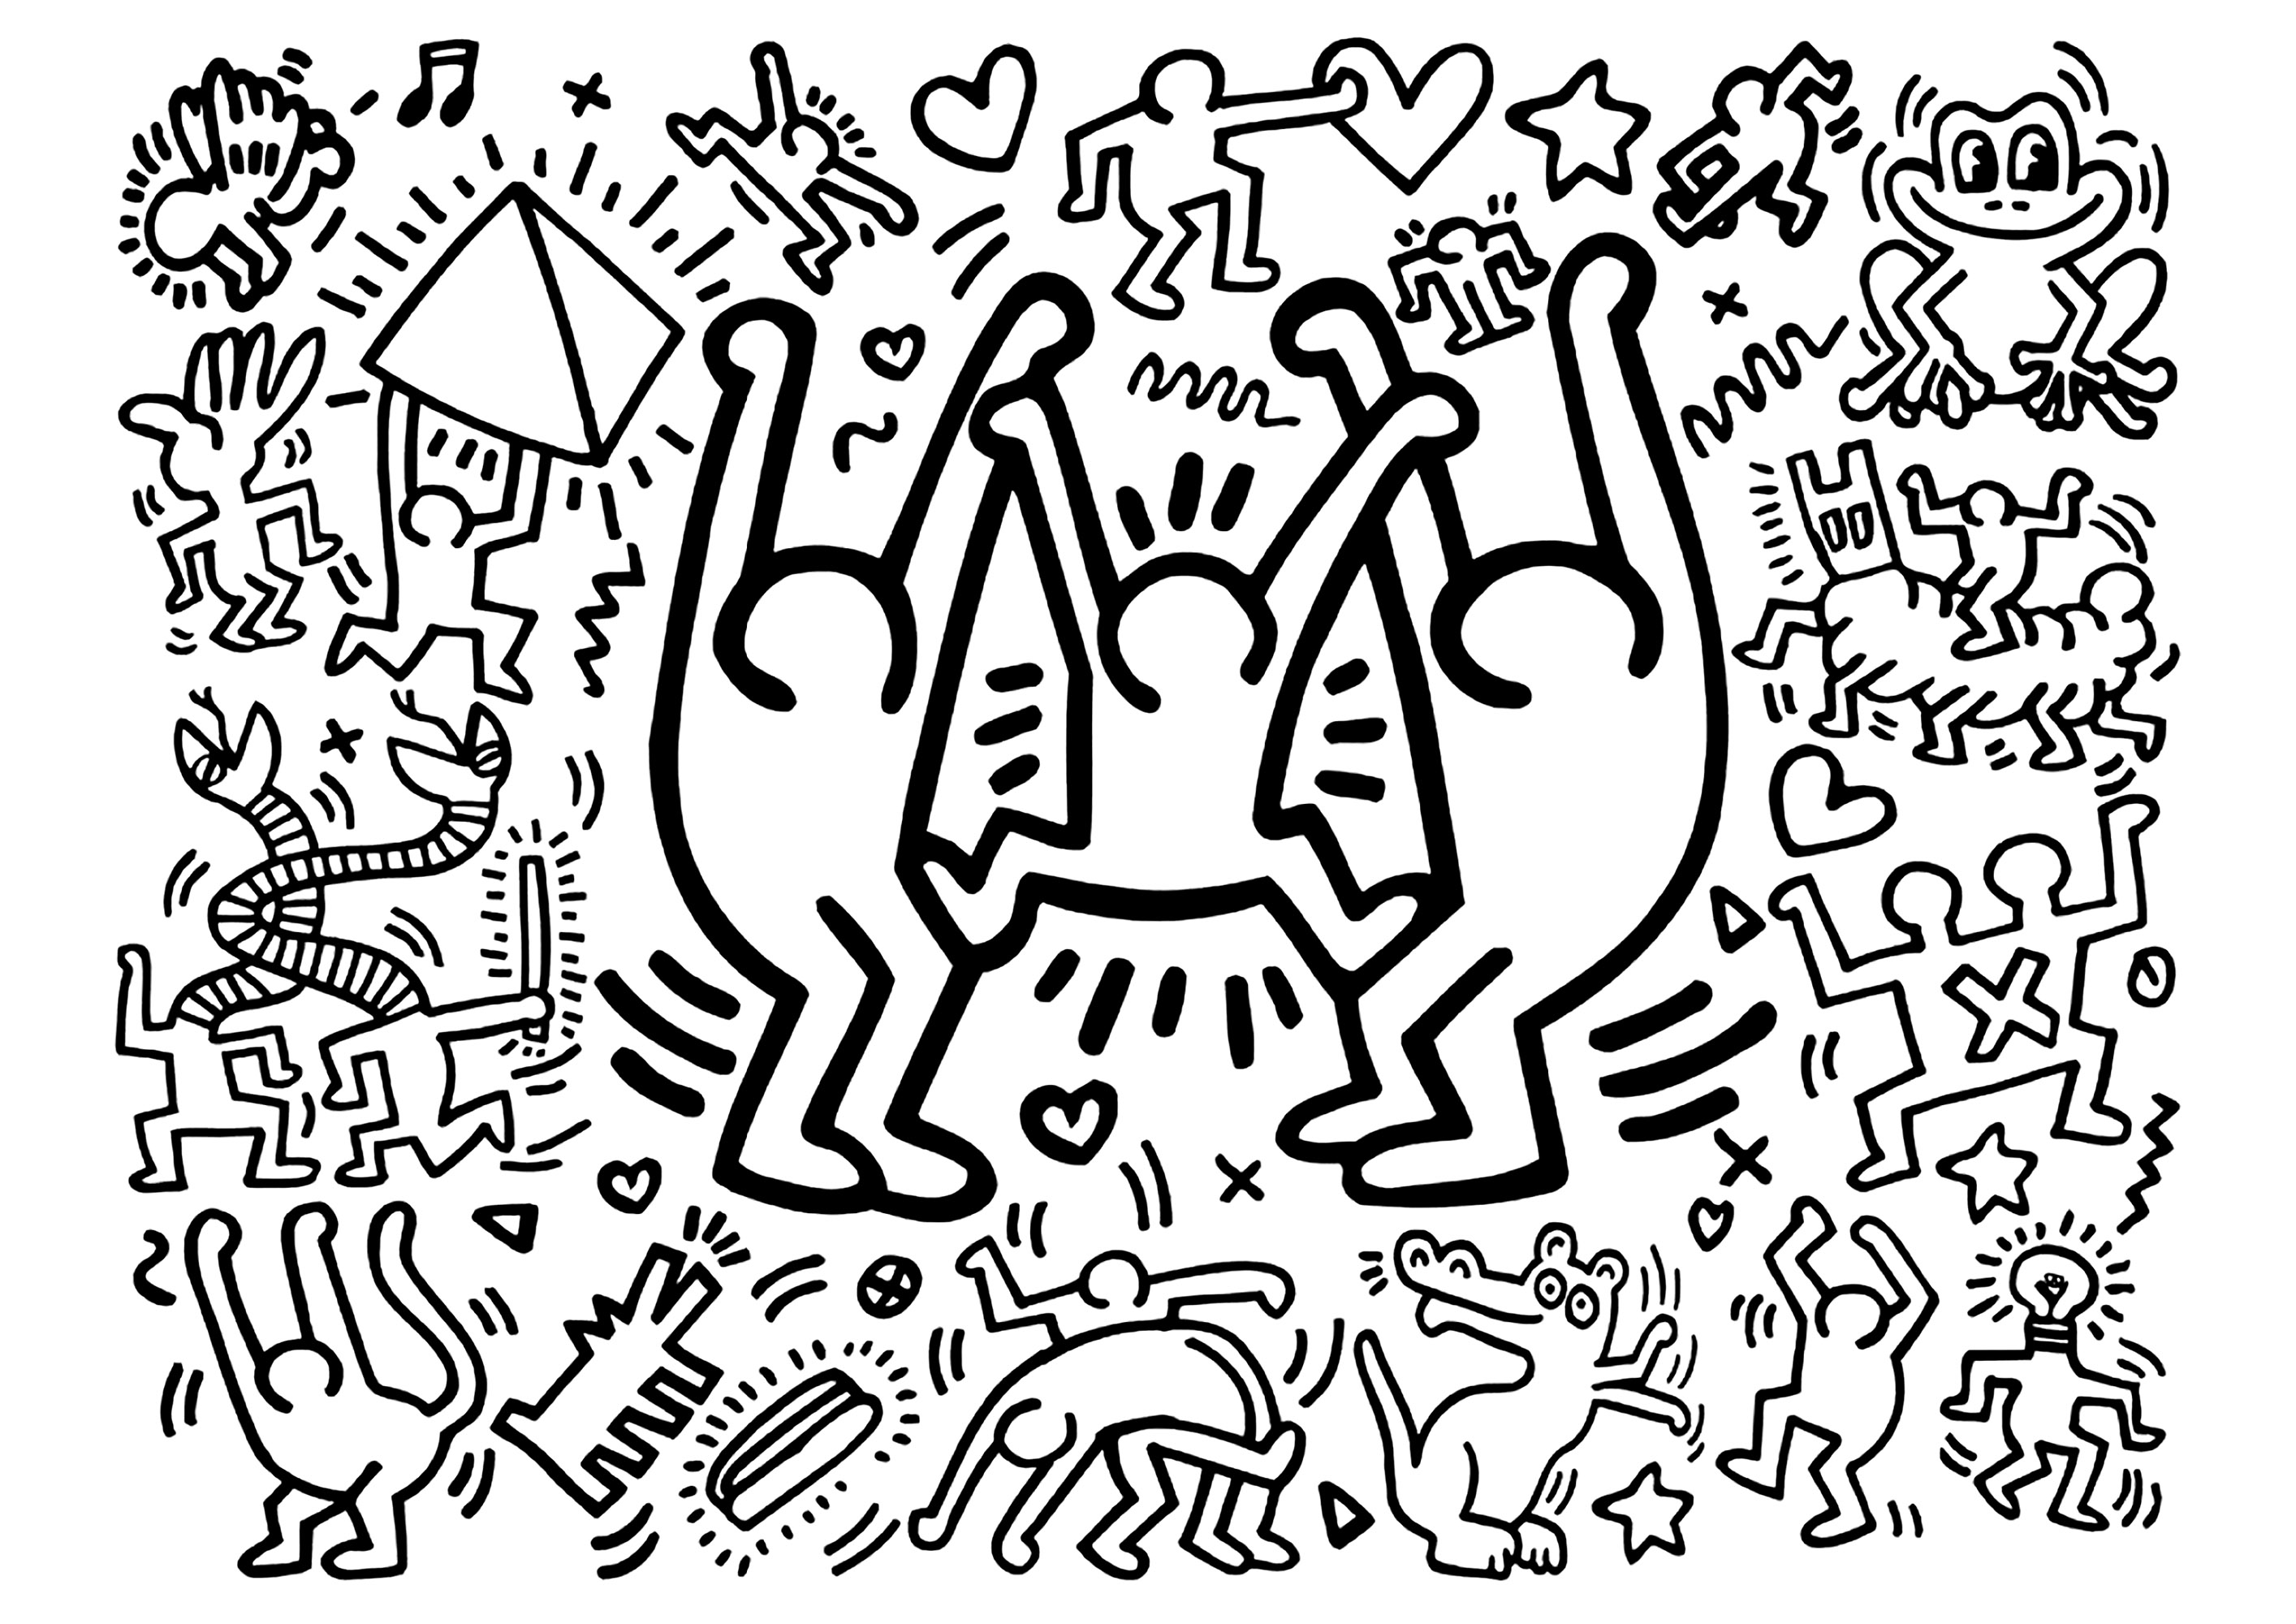 Keith Haring: Three large, cheerful characters and some smaller ones. A coloring book based on a work by Keith Haring